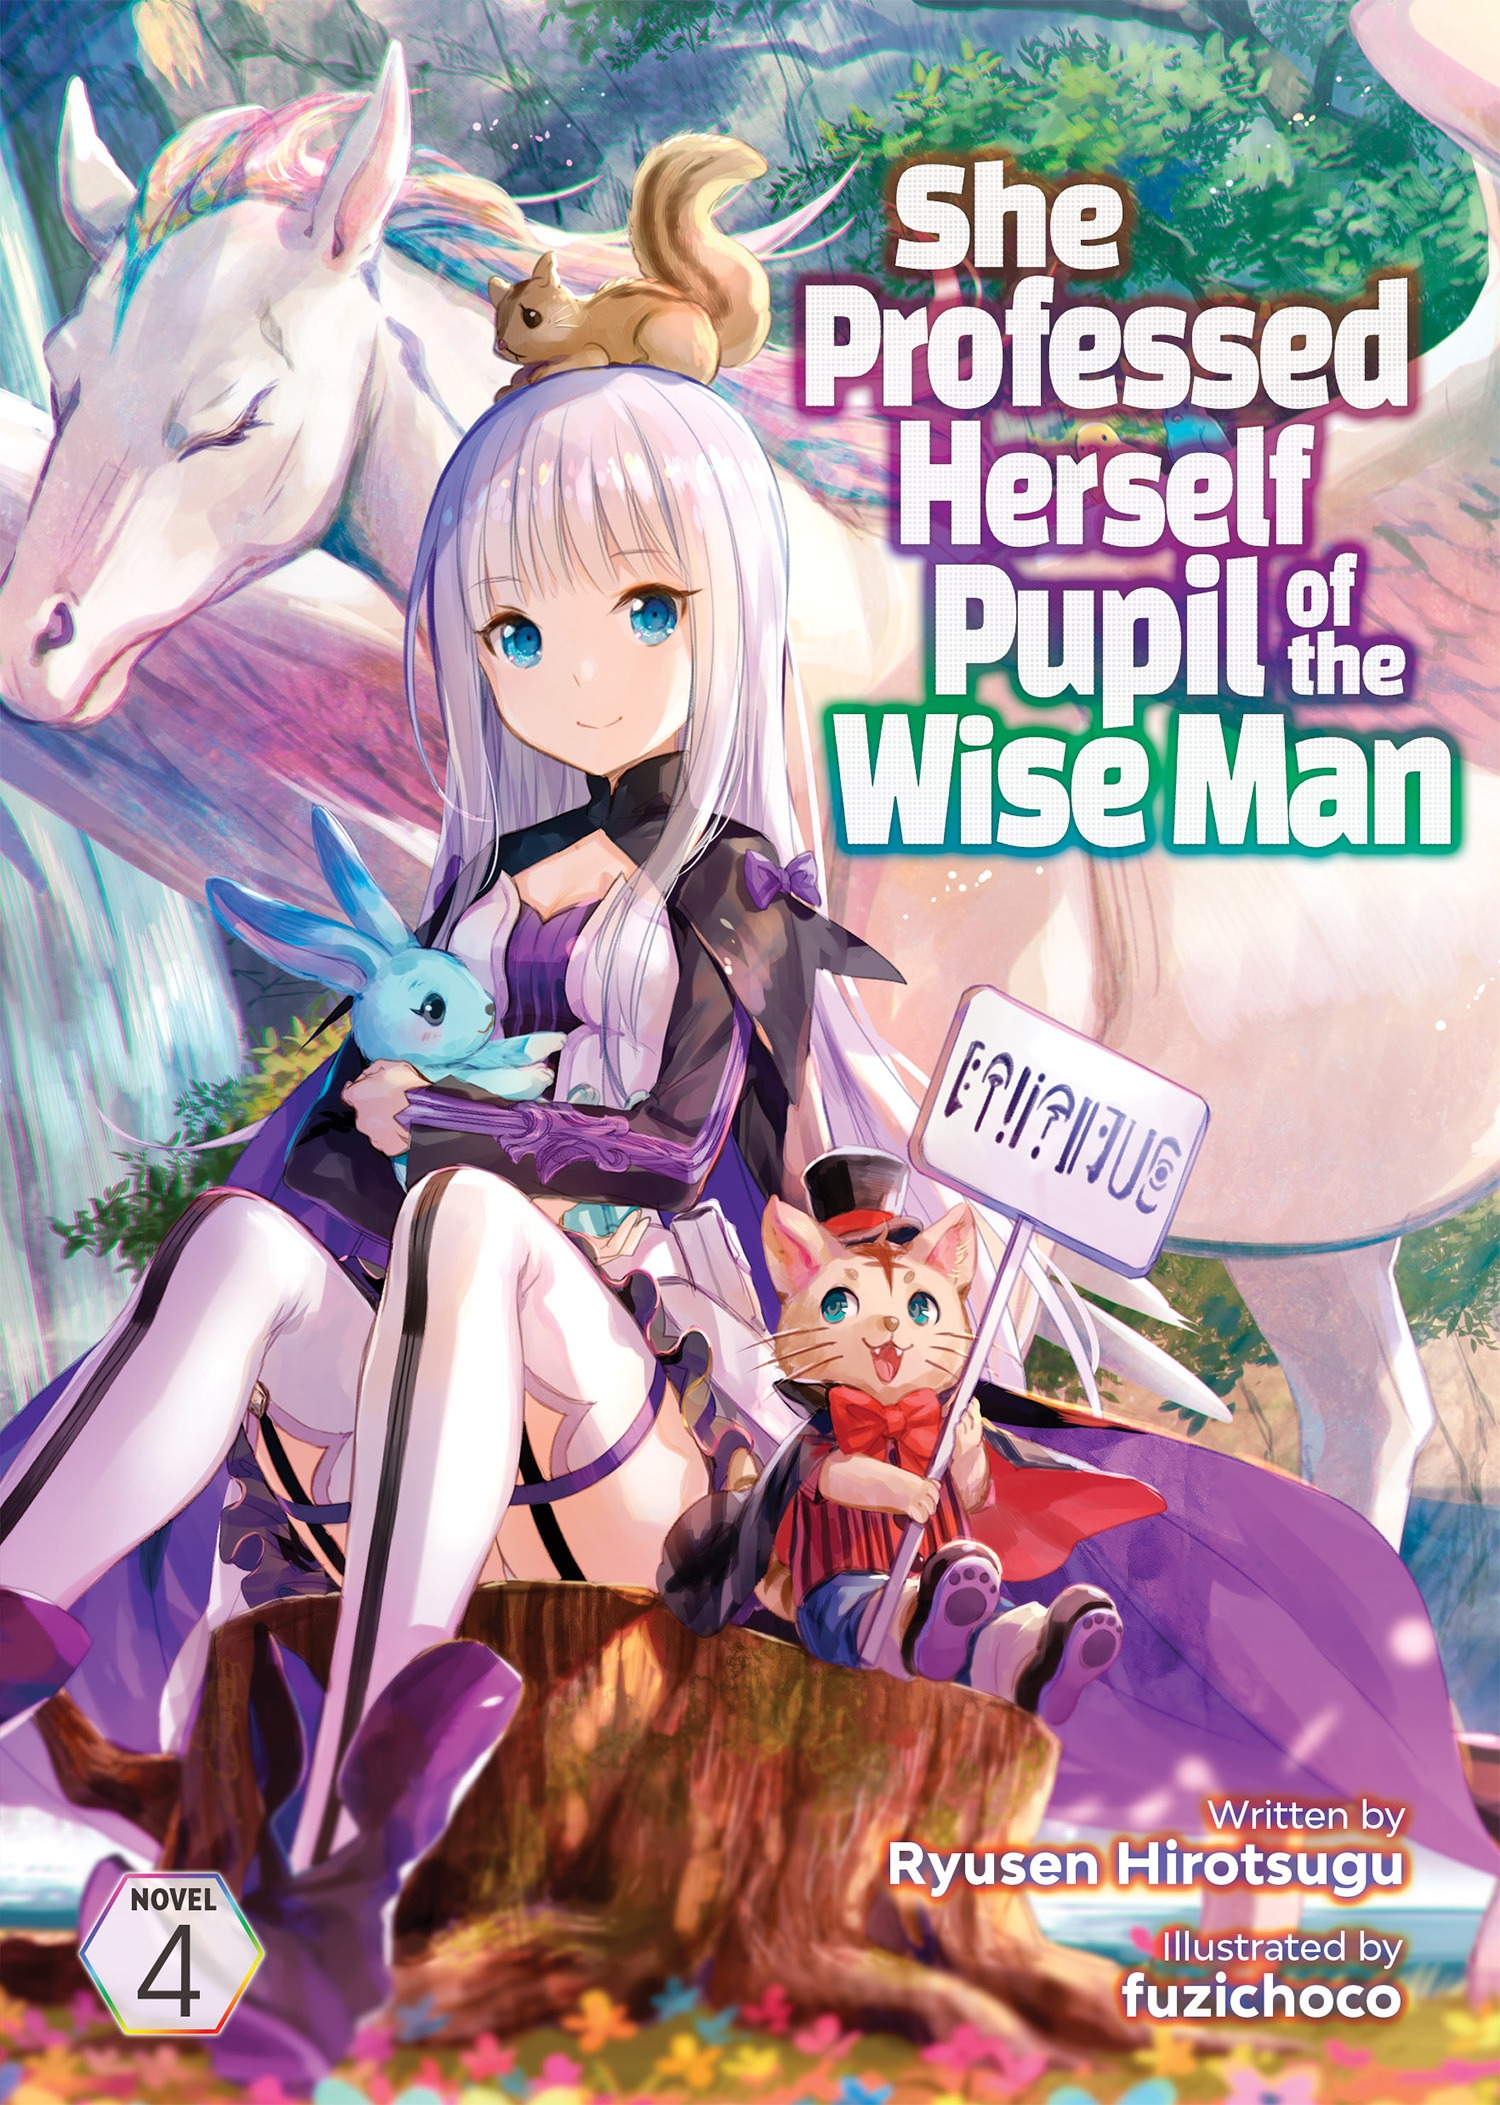 She Professed Herself Pupil of the Wiseman – English Light Novels